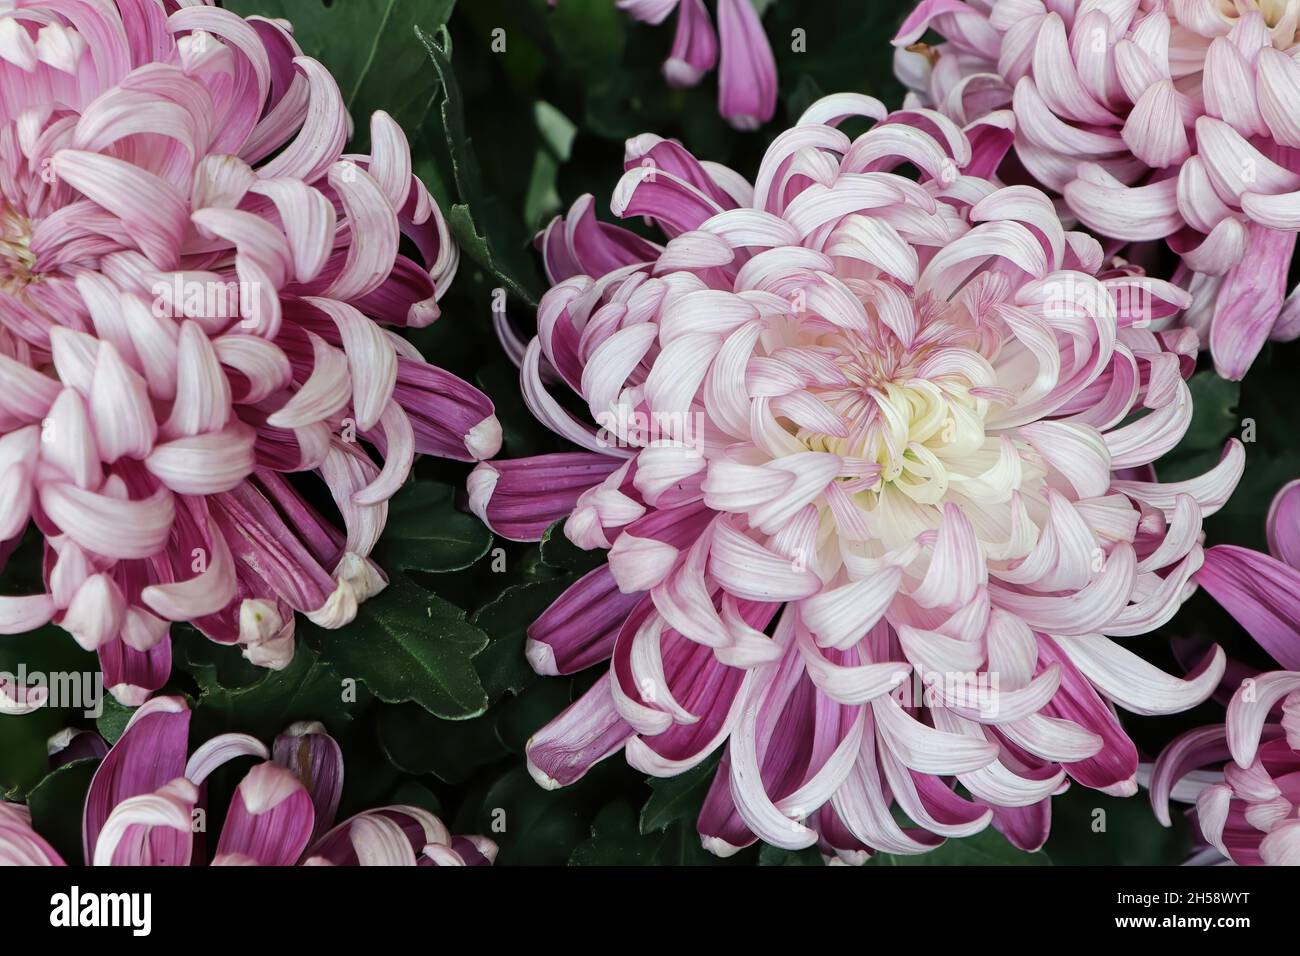 Background of pink and white shades on a spider mum Stock Photo